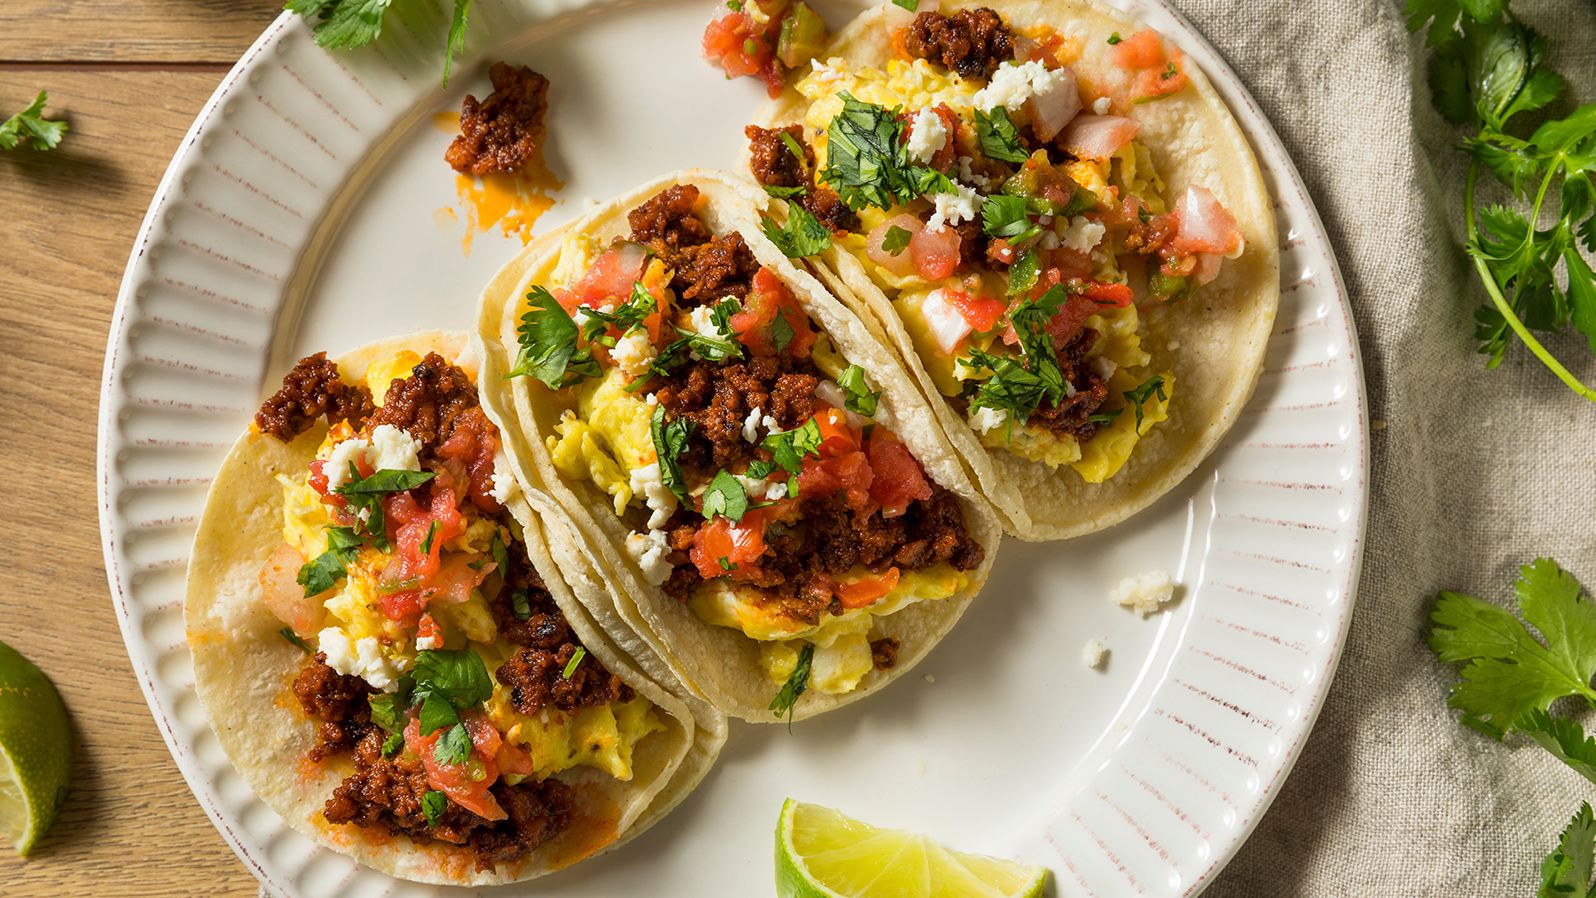 Make every day National Taco Day with these tasty recipes | CNN